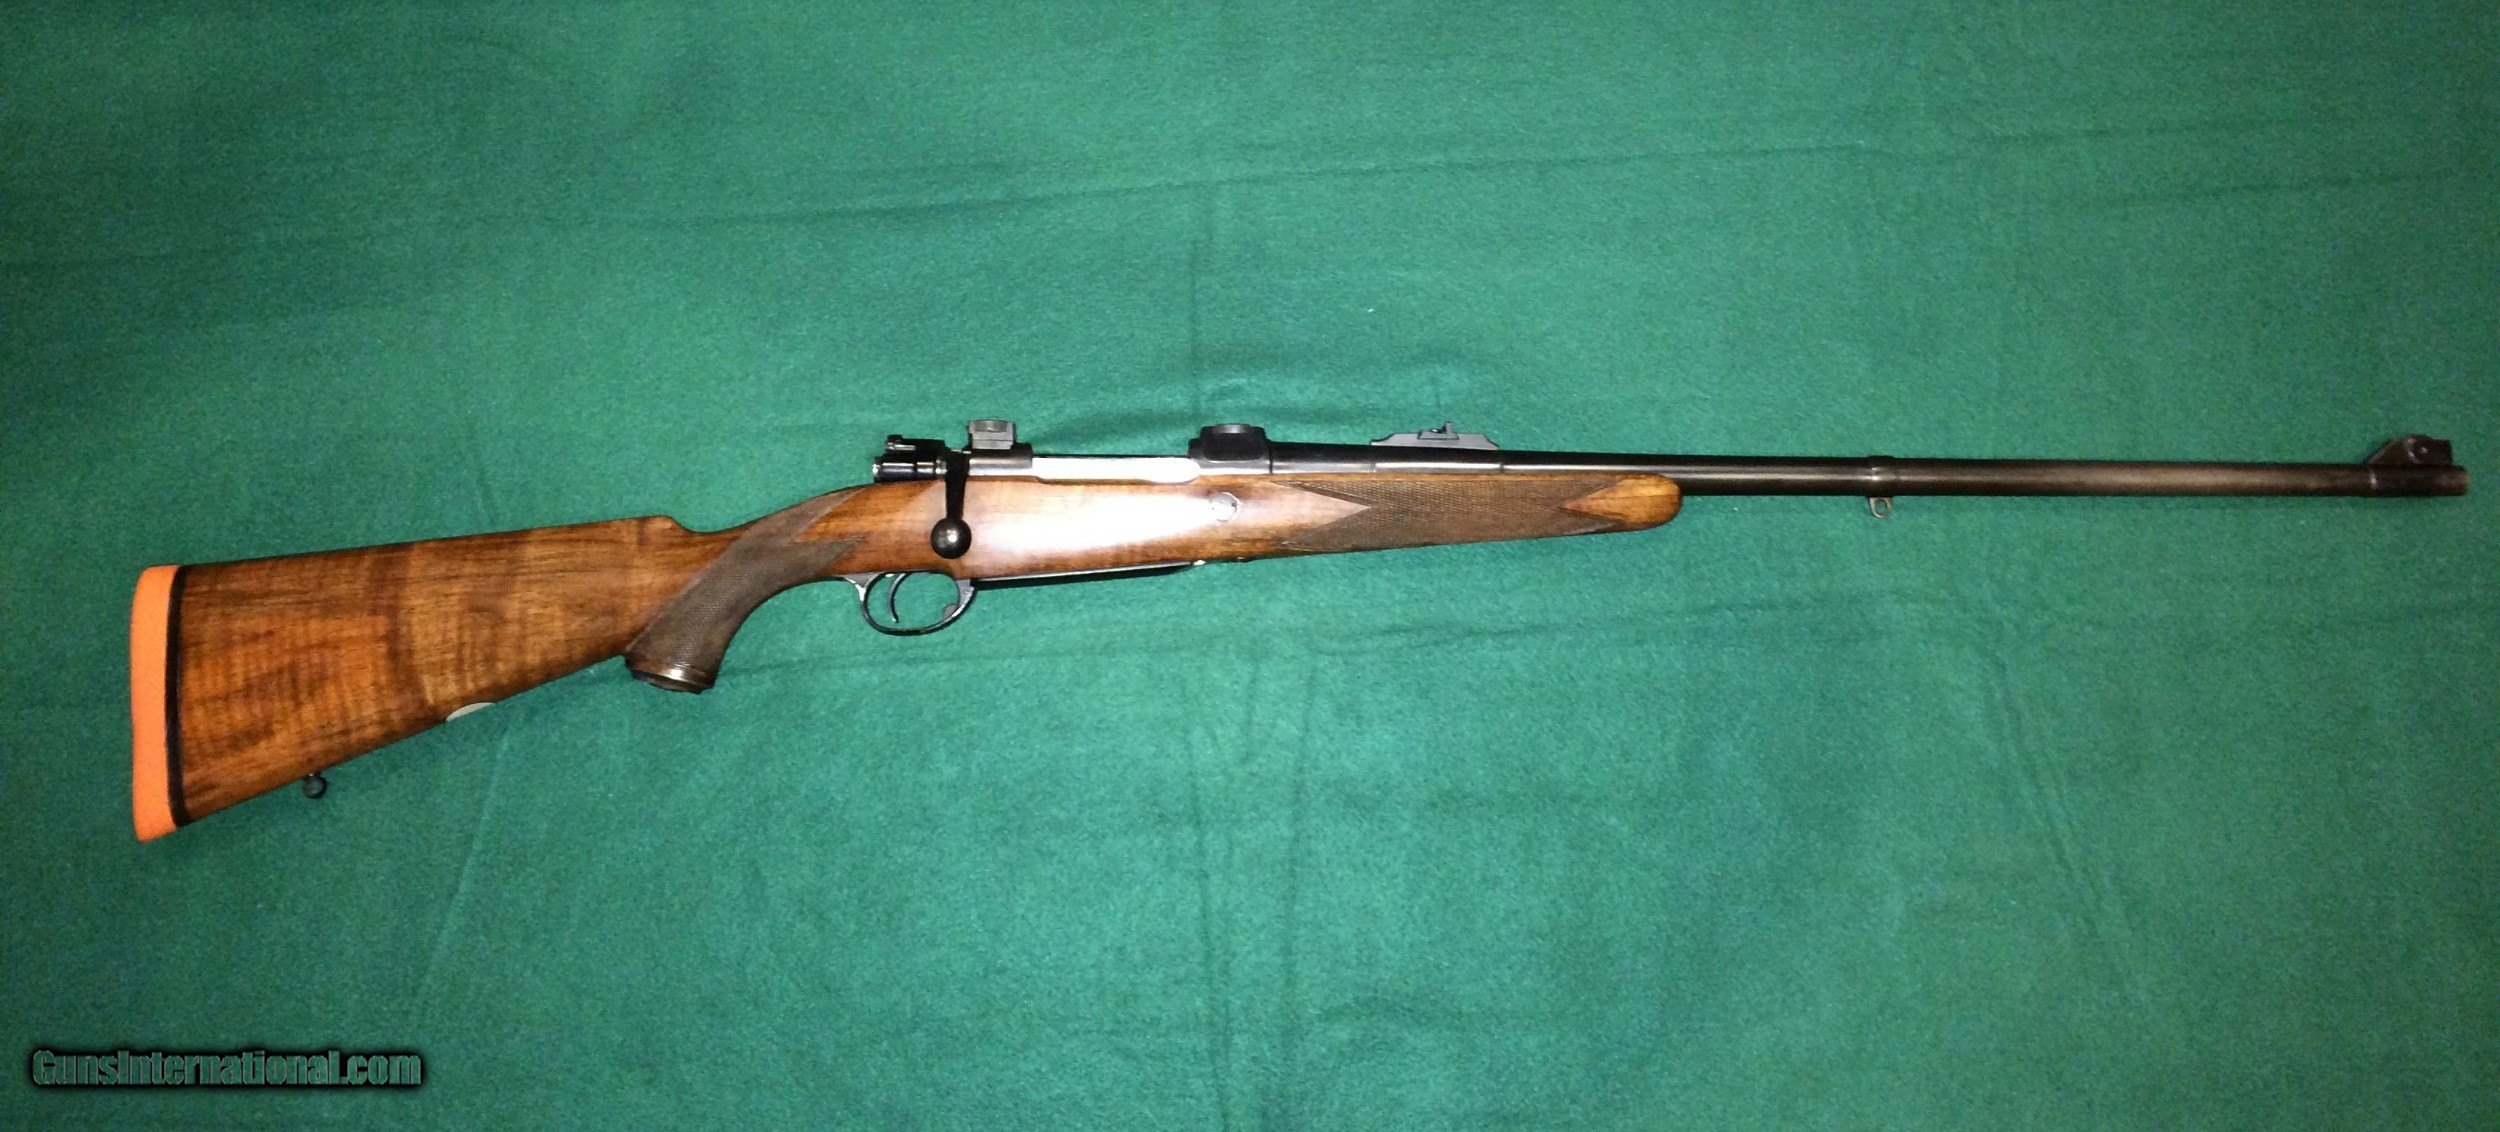 holland and holland rifle for sale